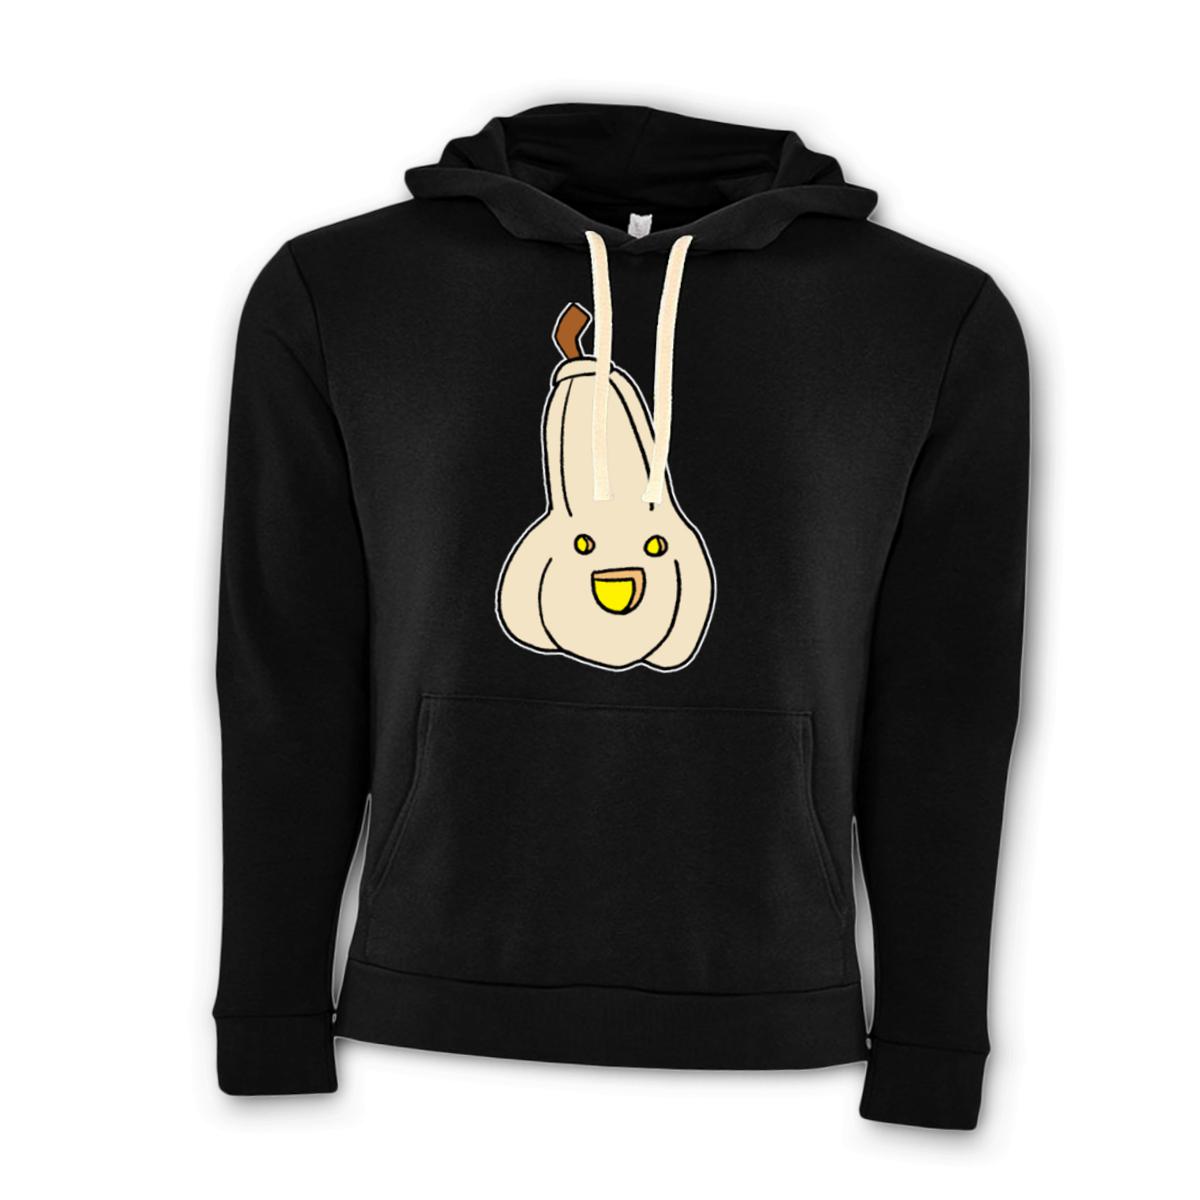 The New Guy Unisex Pullover Hoodie Small black